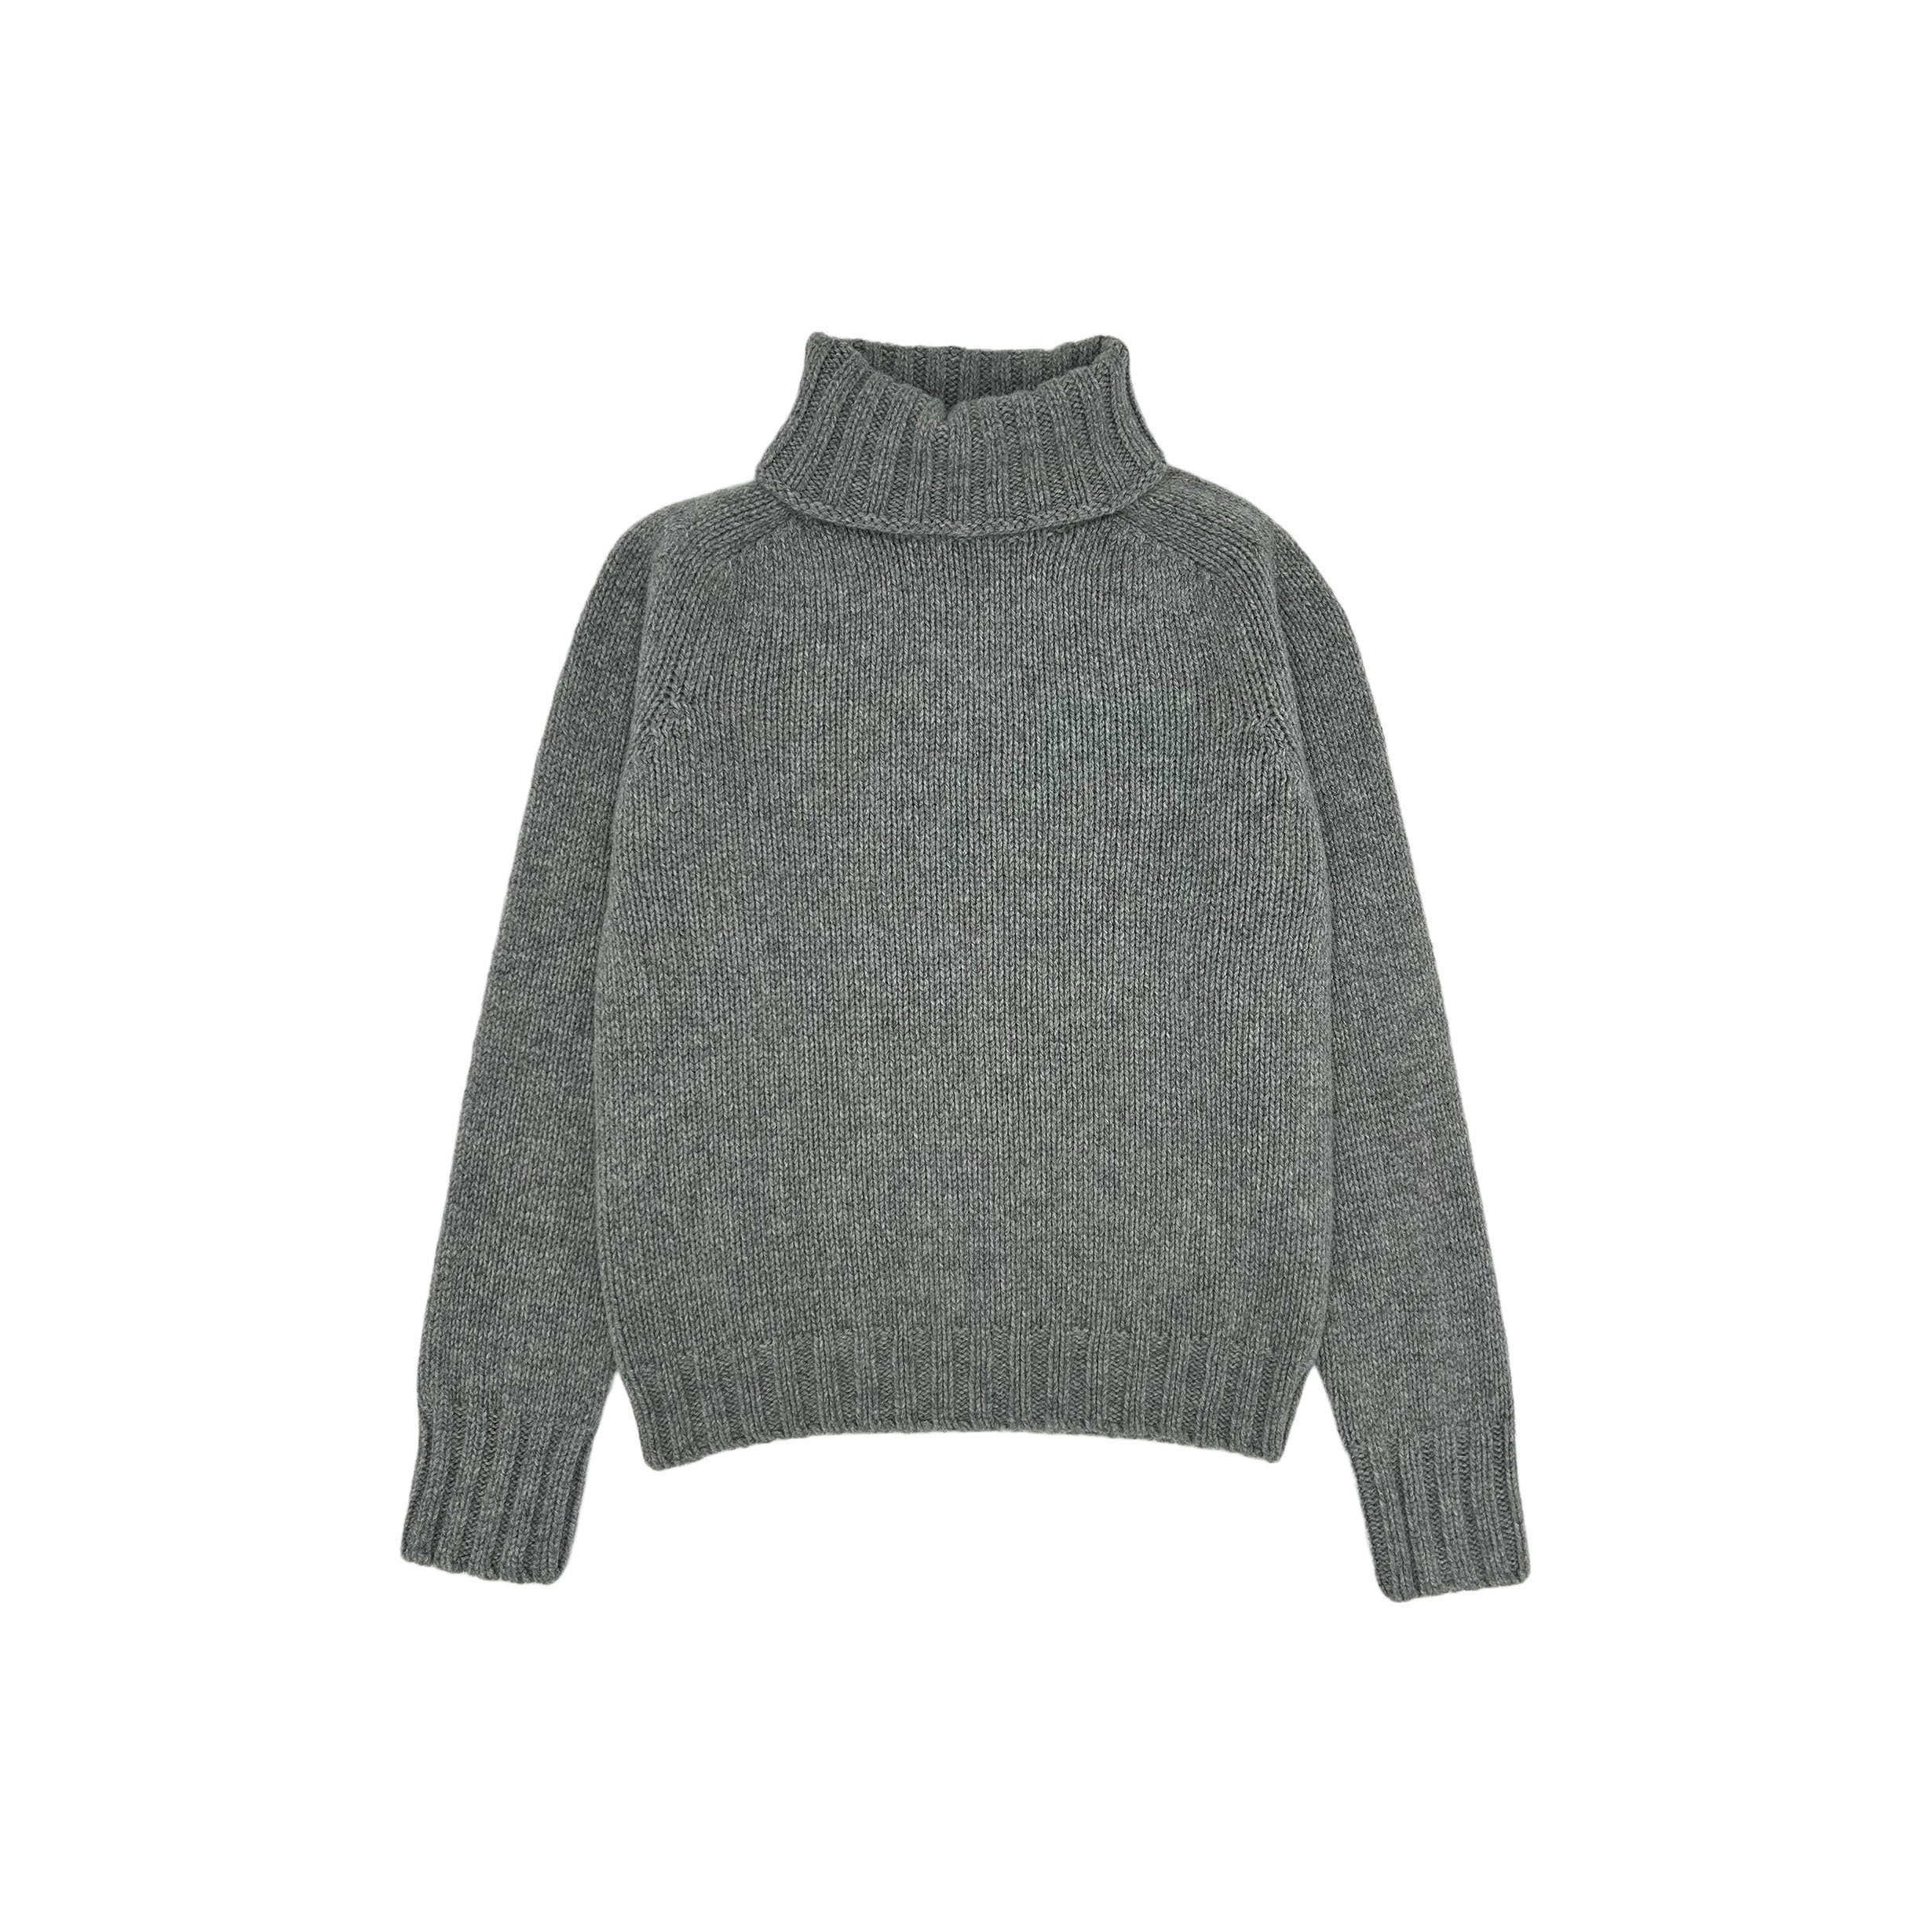 An image of Womens 'Big Softy' Geelong Polo Neck Jumper - 6 Colours - XL/Flannel Grey